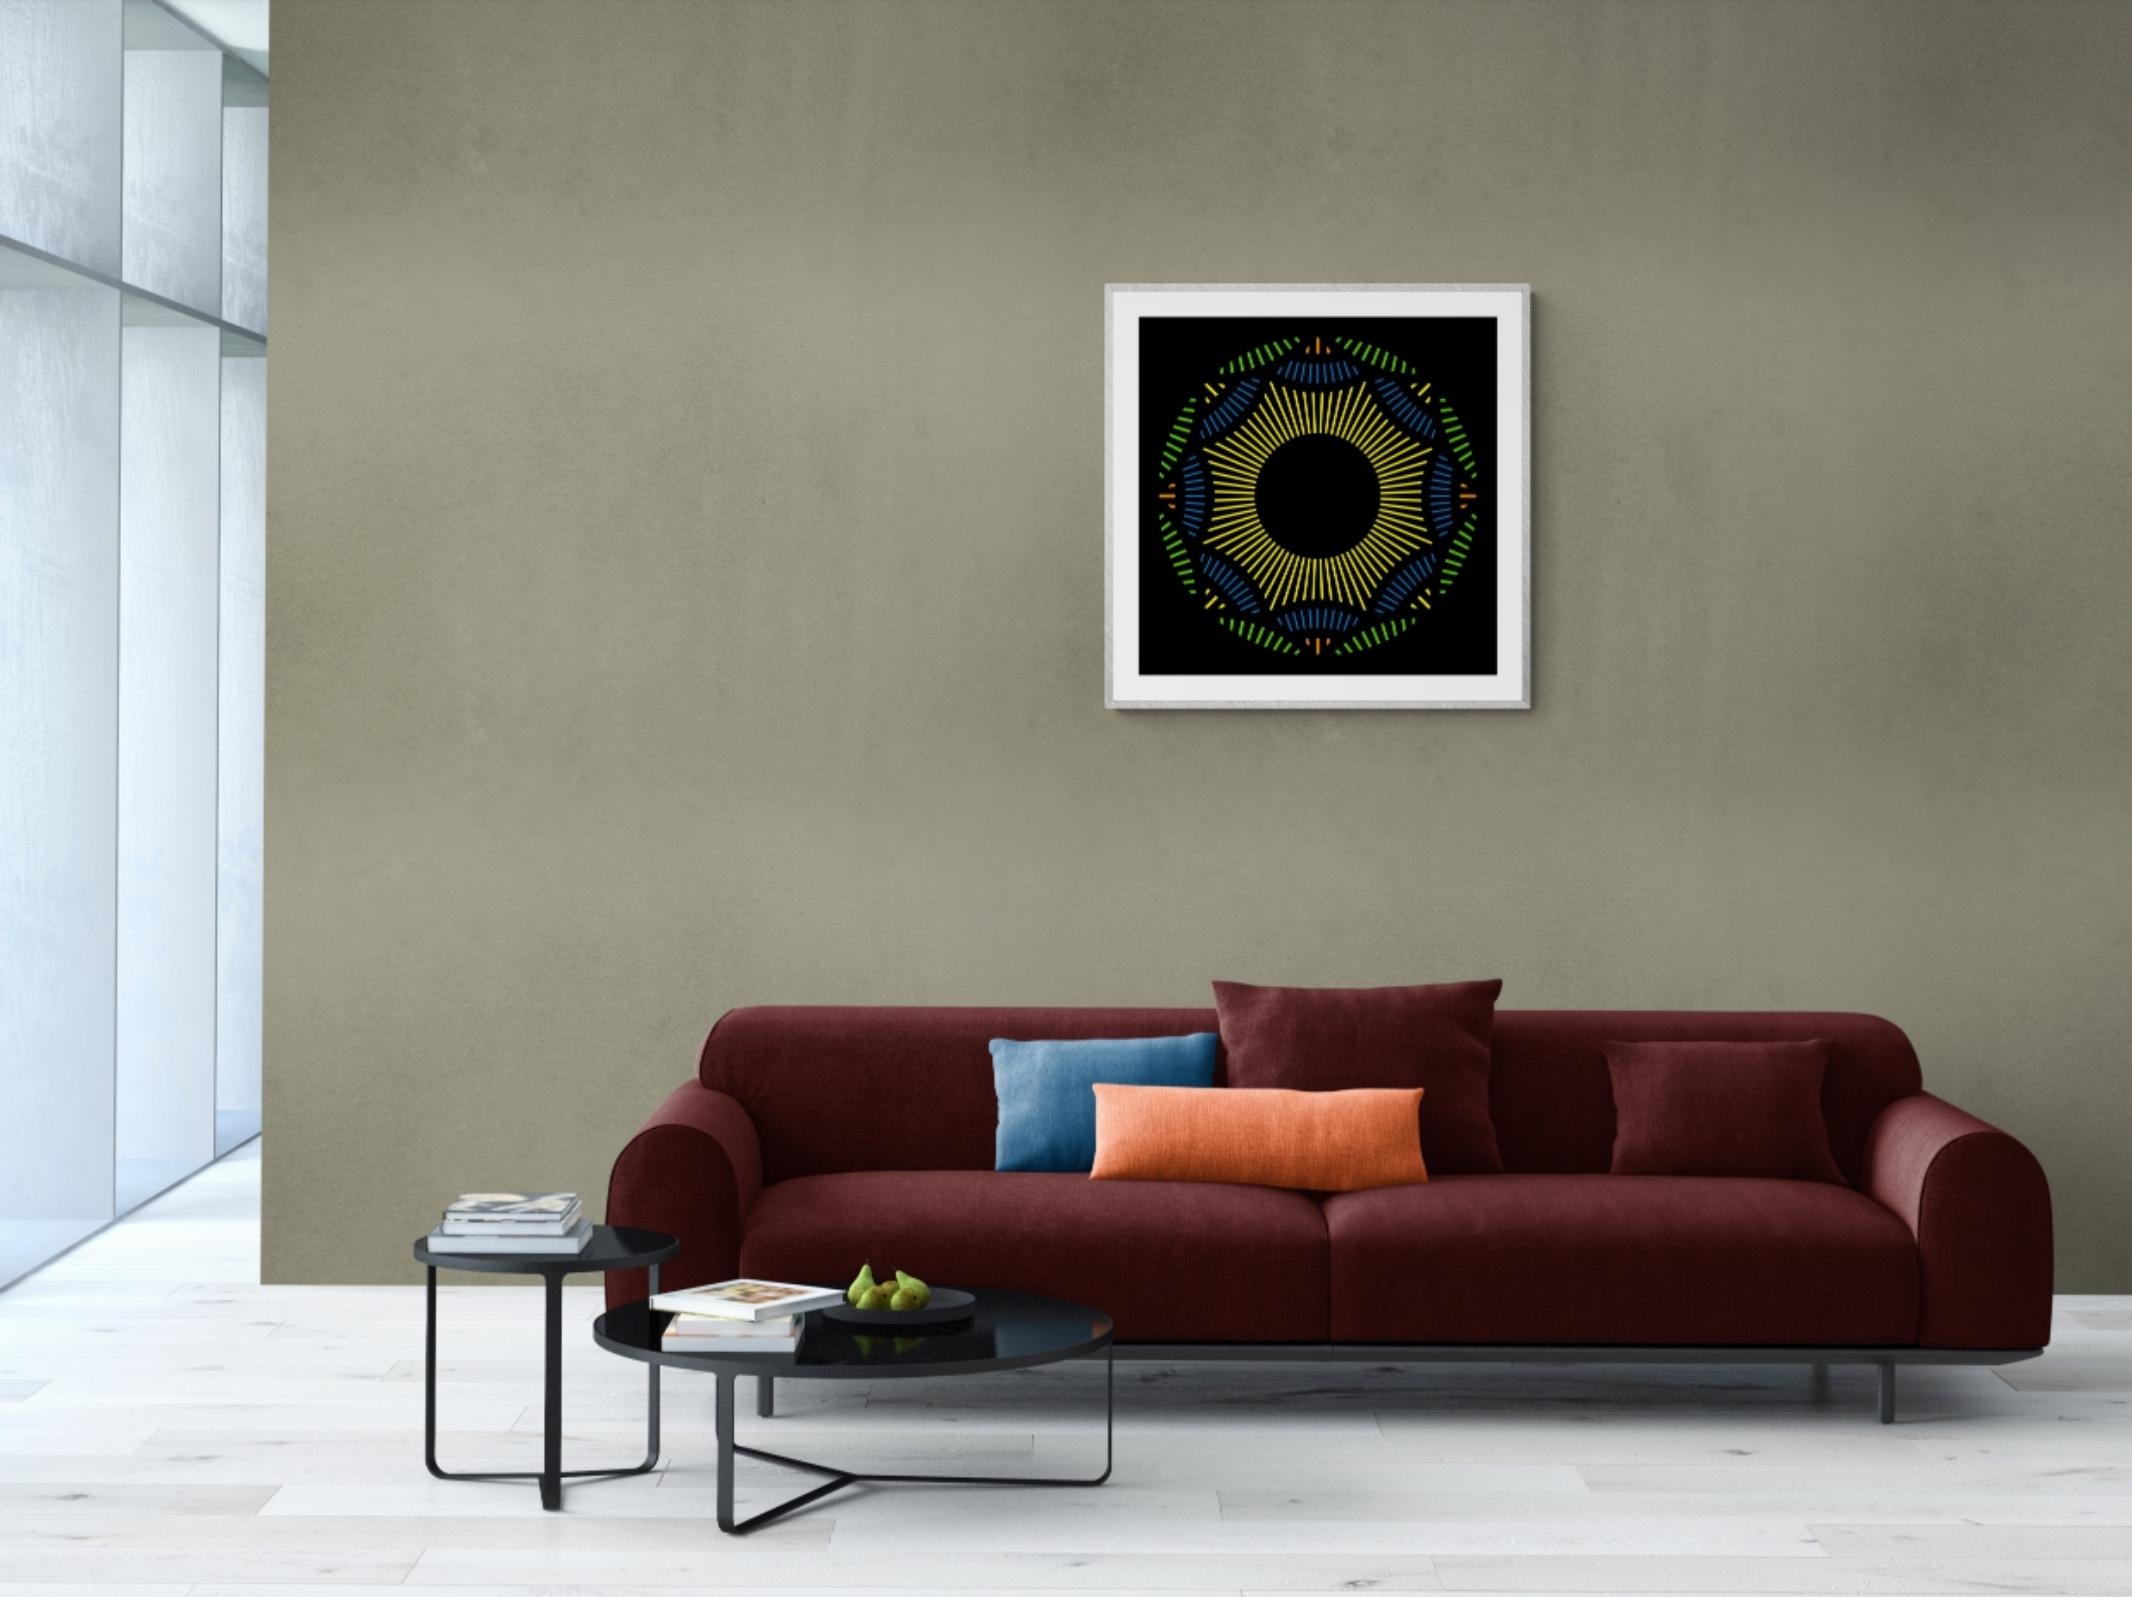 Nebulosa 18 - Abstract Geometric Print by Julio Campos